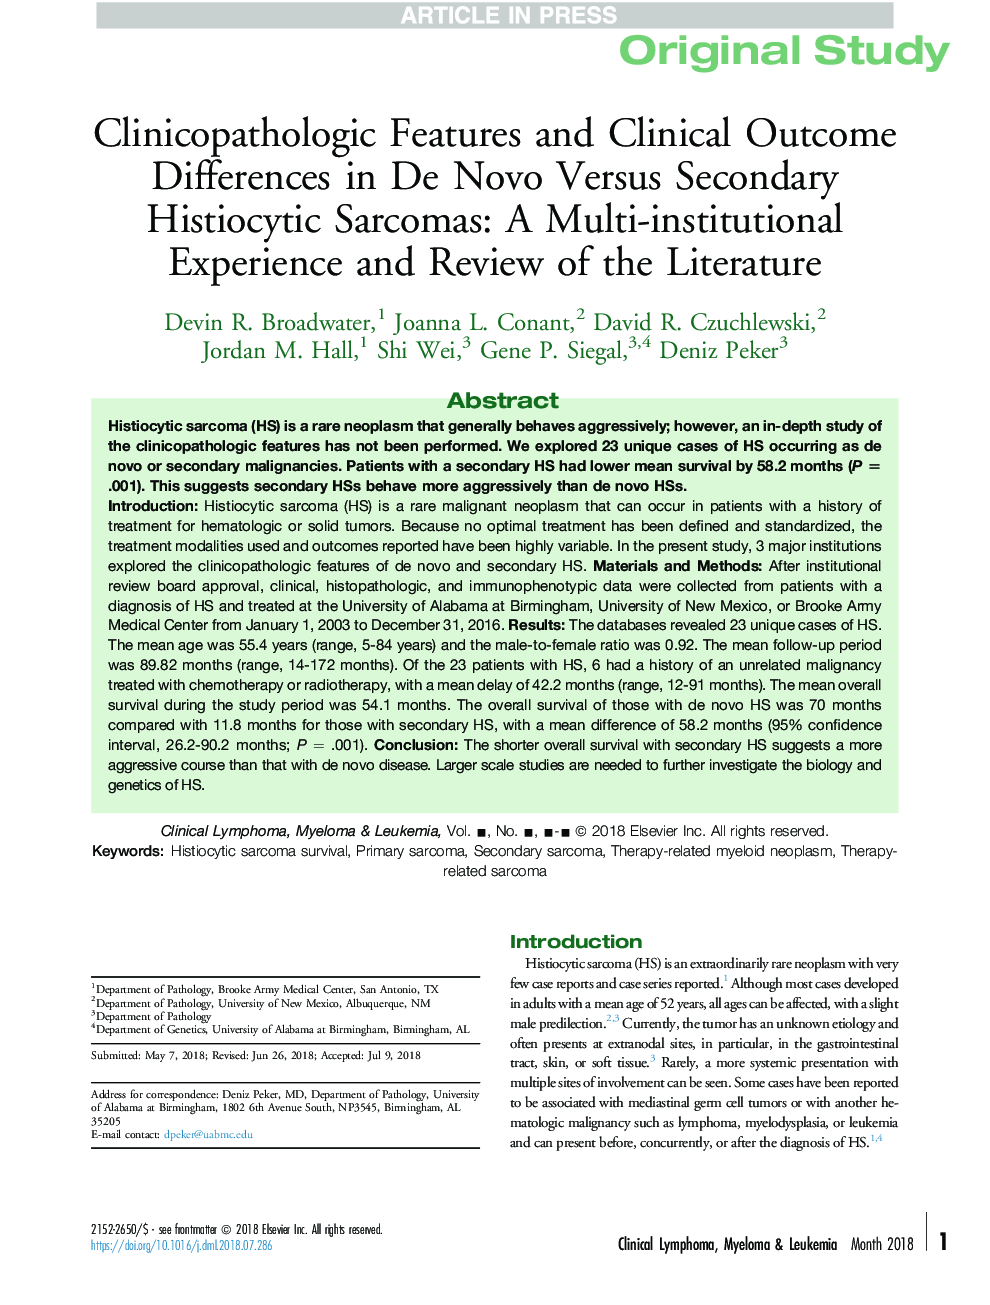 Clinicopathologic Features and Clinical Outcome Differences in De Novo Versus Secondary Histiocytic Sarcomas: A Multi-institutional Experience and Review of the Literature